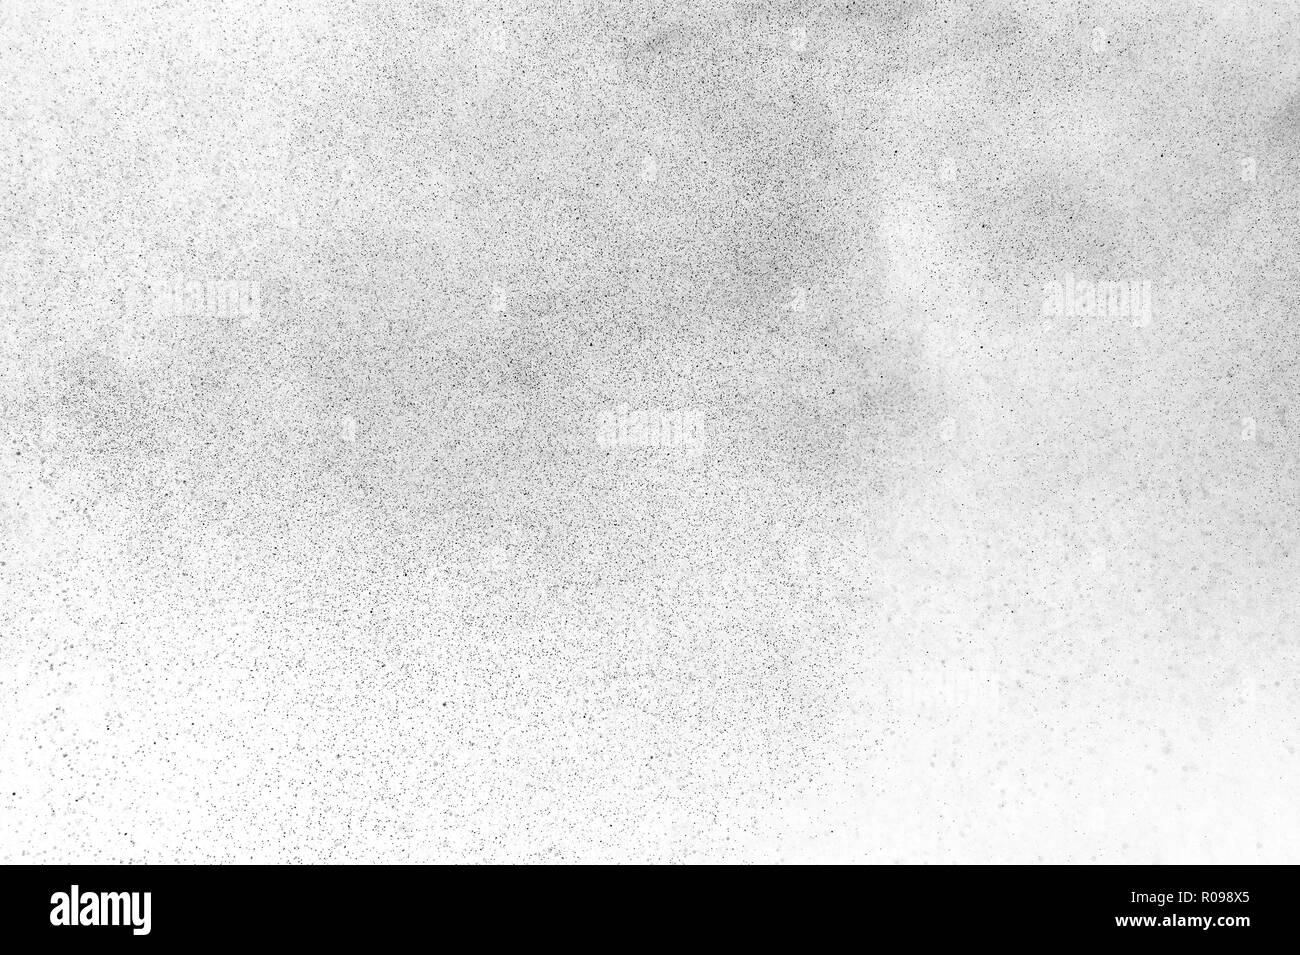 Black particles explosion isolated on white background. Abstract dust ...